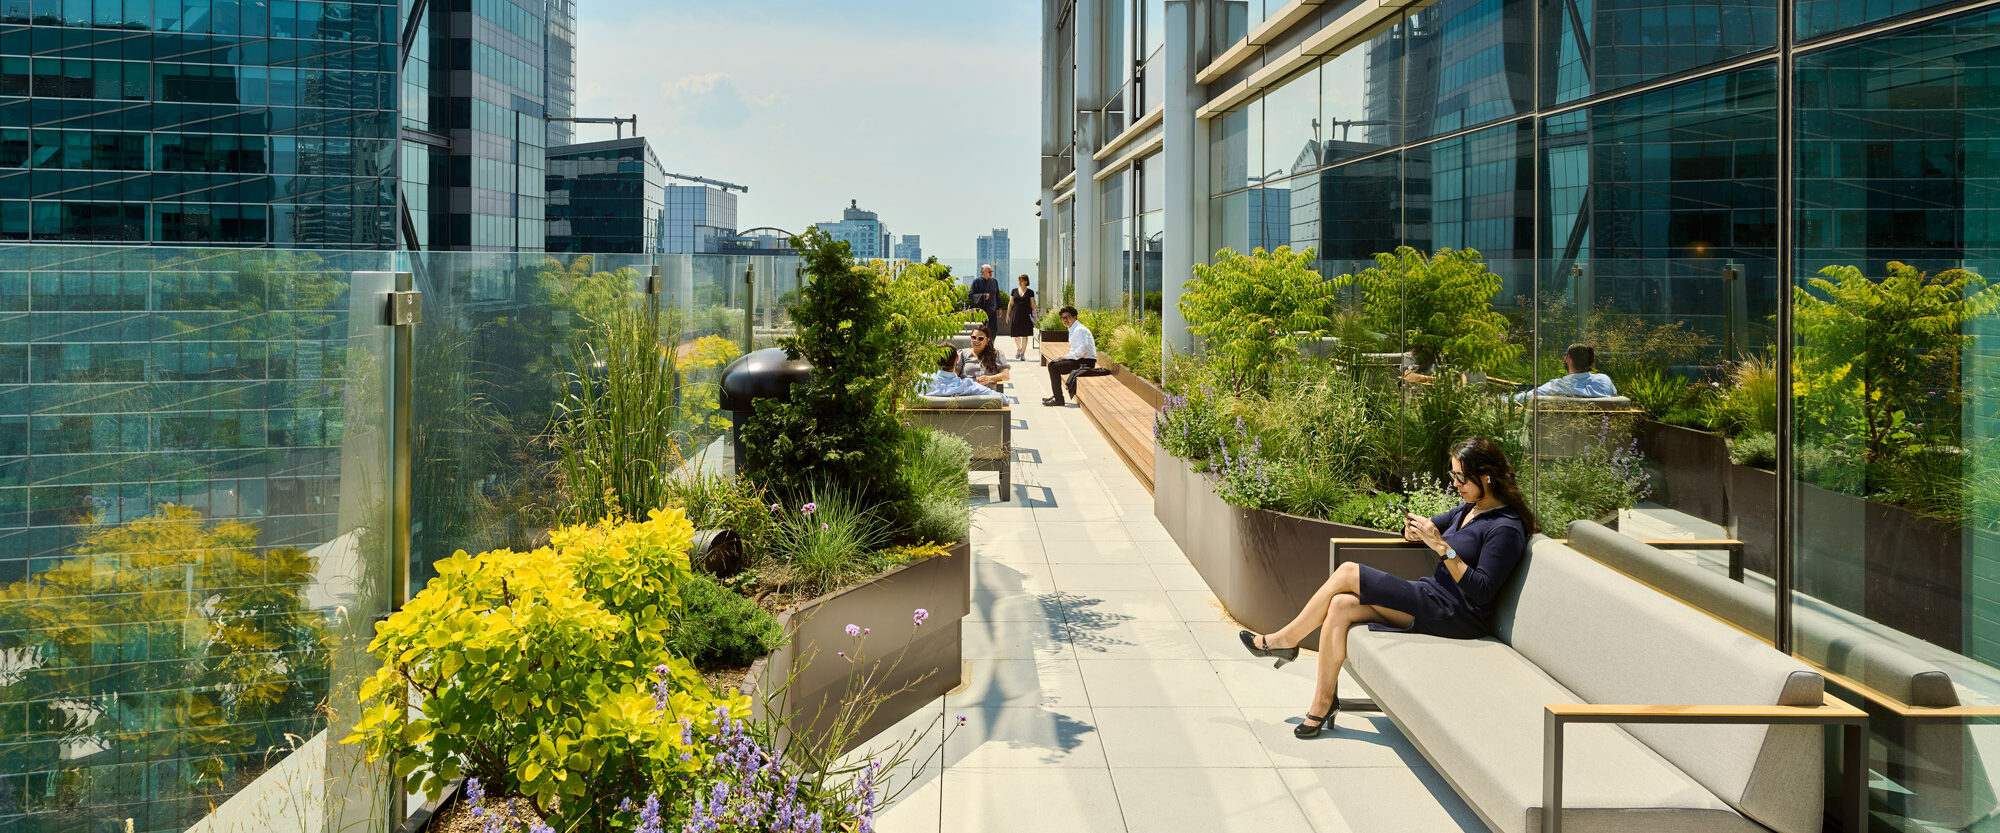 A rooftop garden terrace of an office building with benches, lush plantings, and a view of skyscrapers under a clear sky.